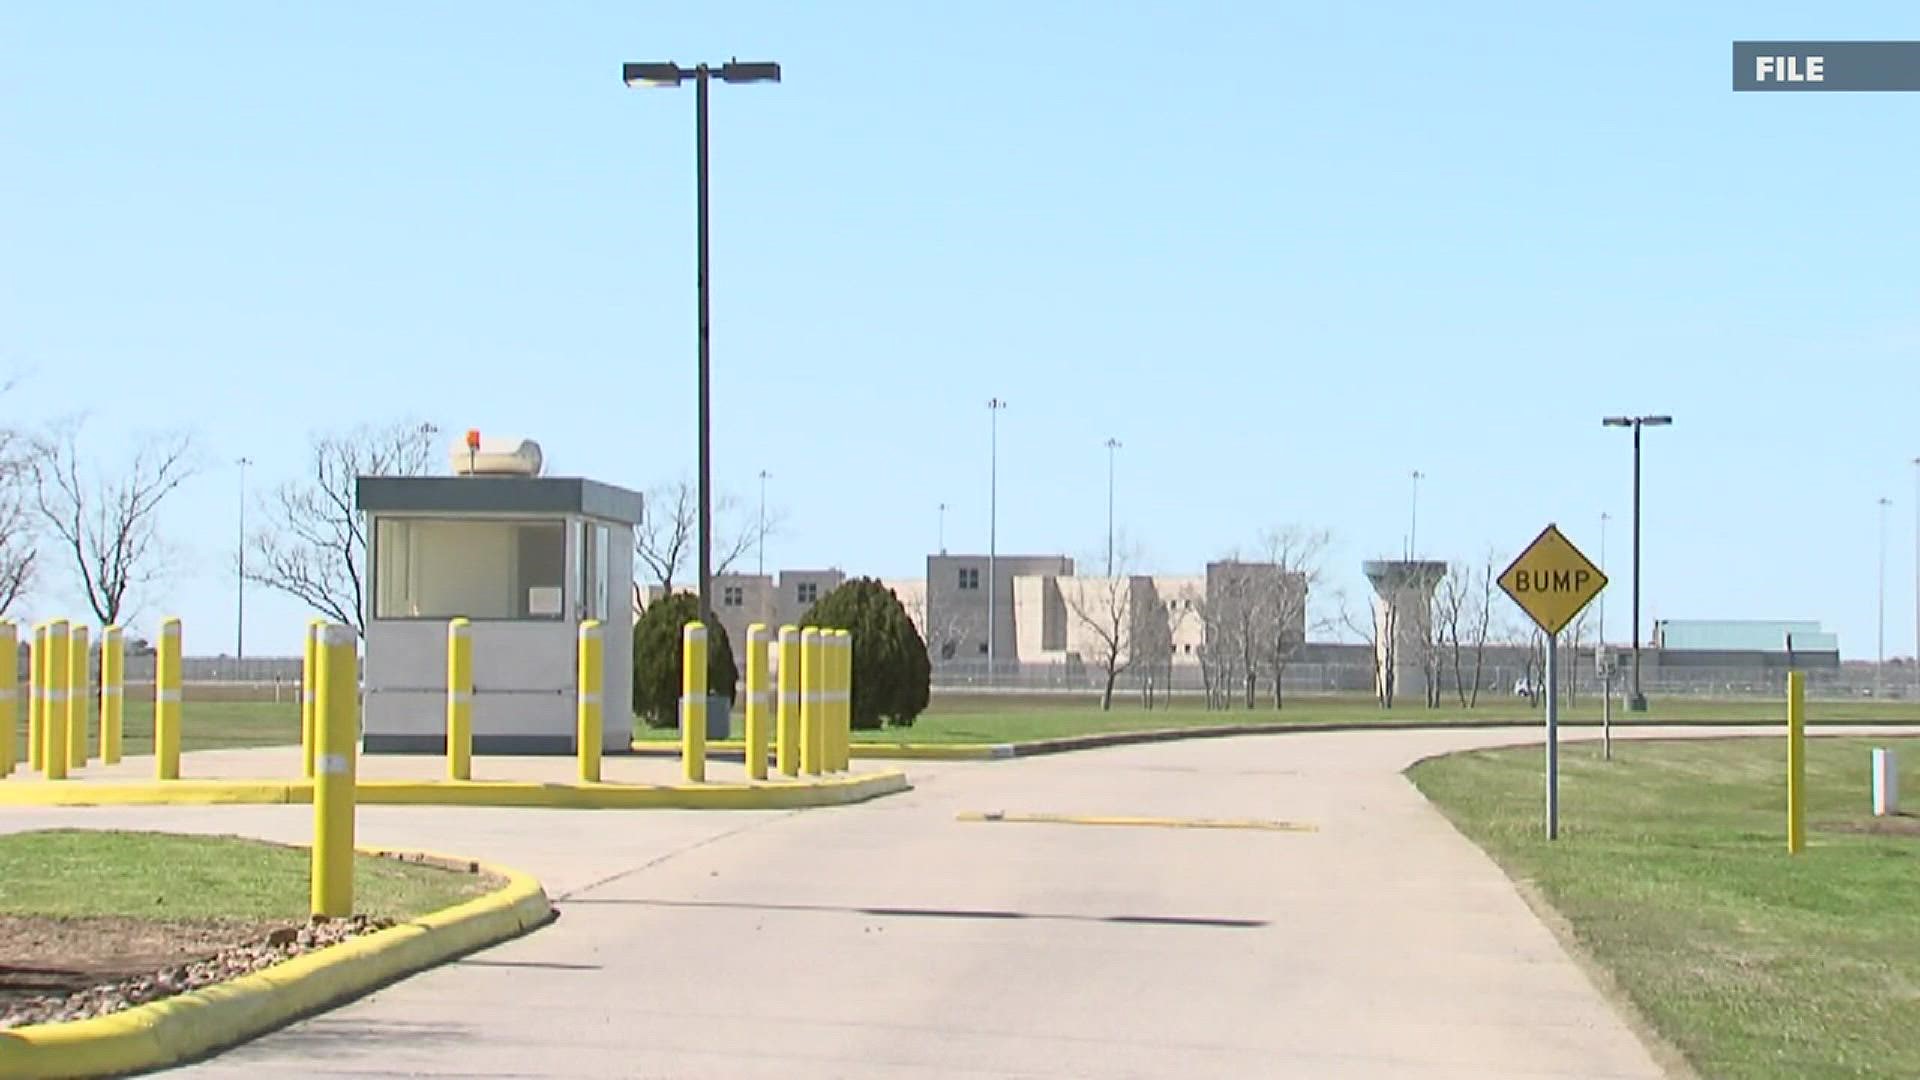 The inmate was taken to a hospital for treatment. There has been no word on their condition.